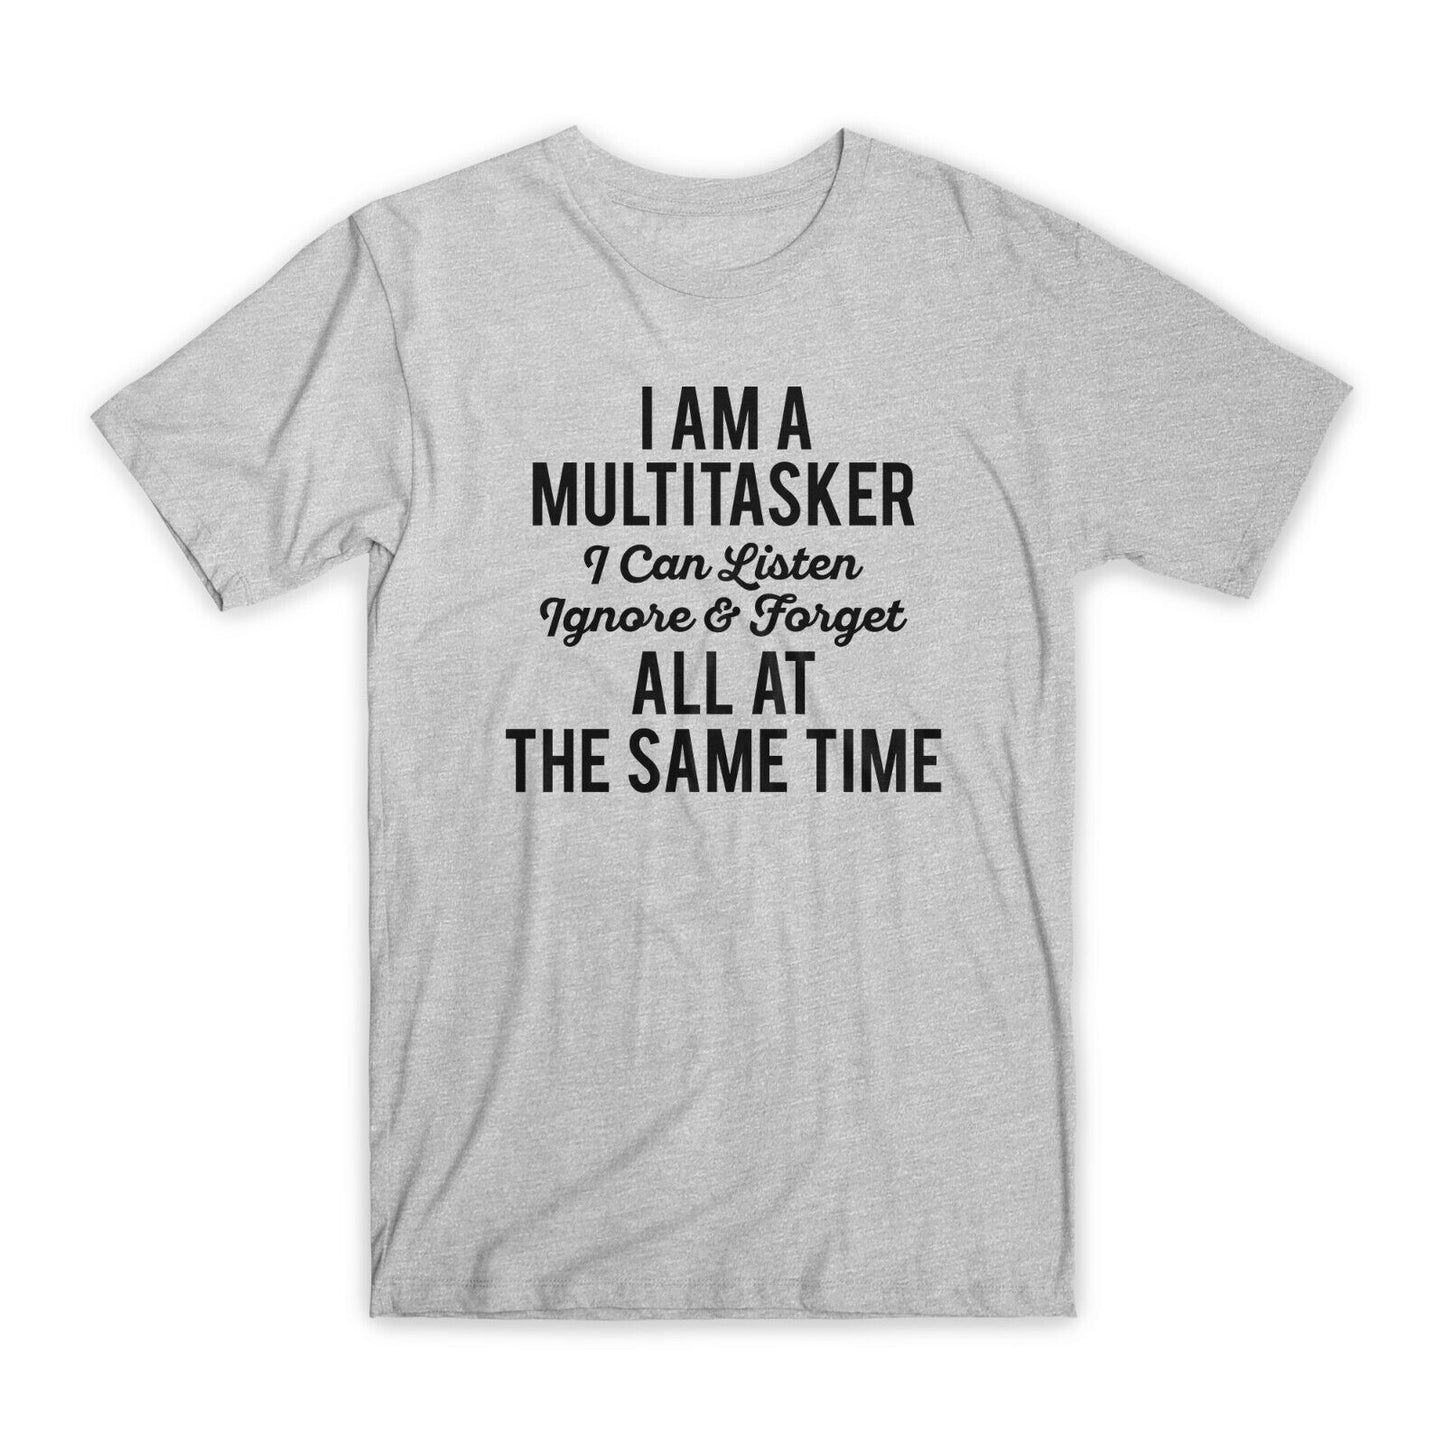 I am A Multitasker T-Shirt Premium Soft Cotton Crew Neck Funny Tees Gifts NEW